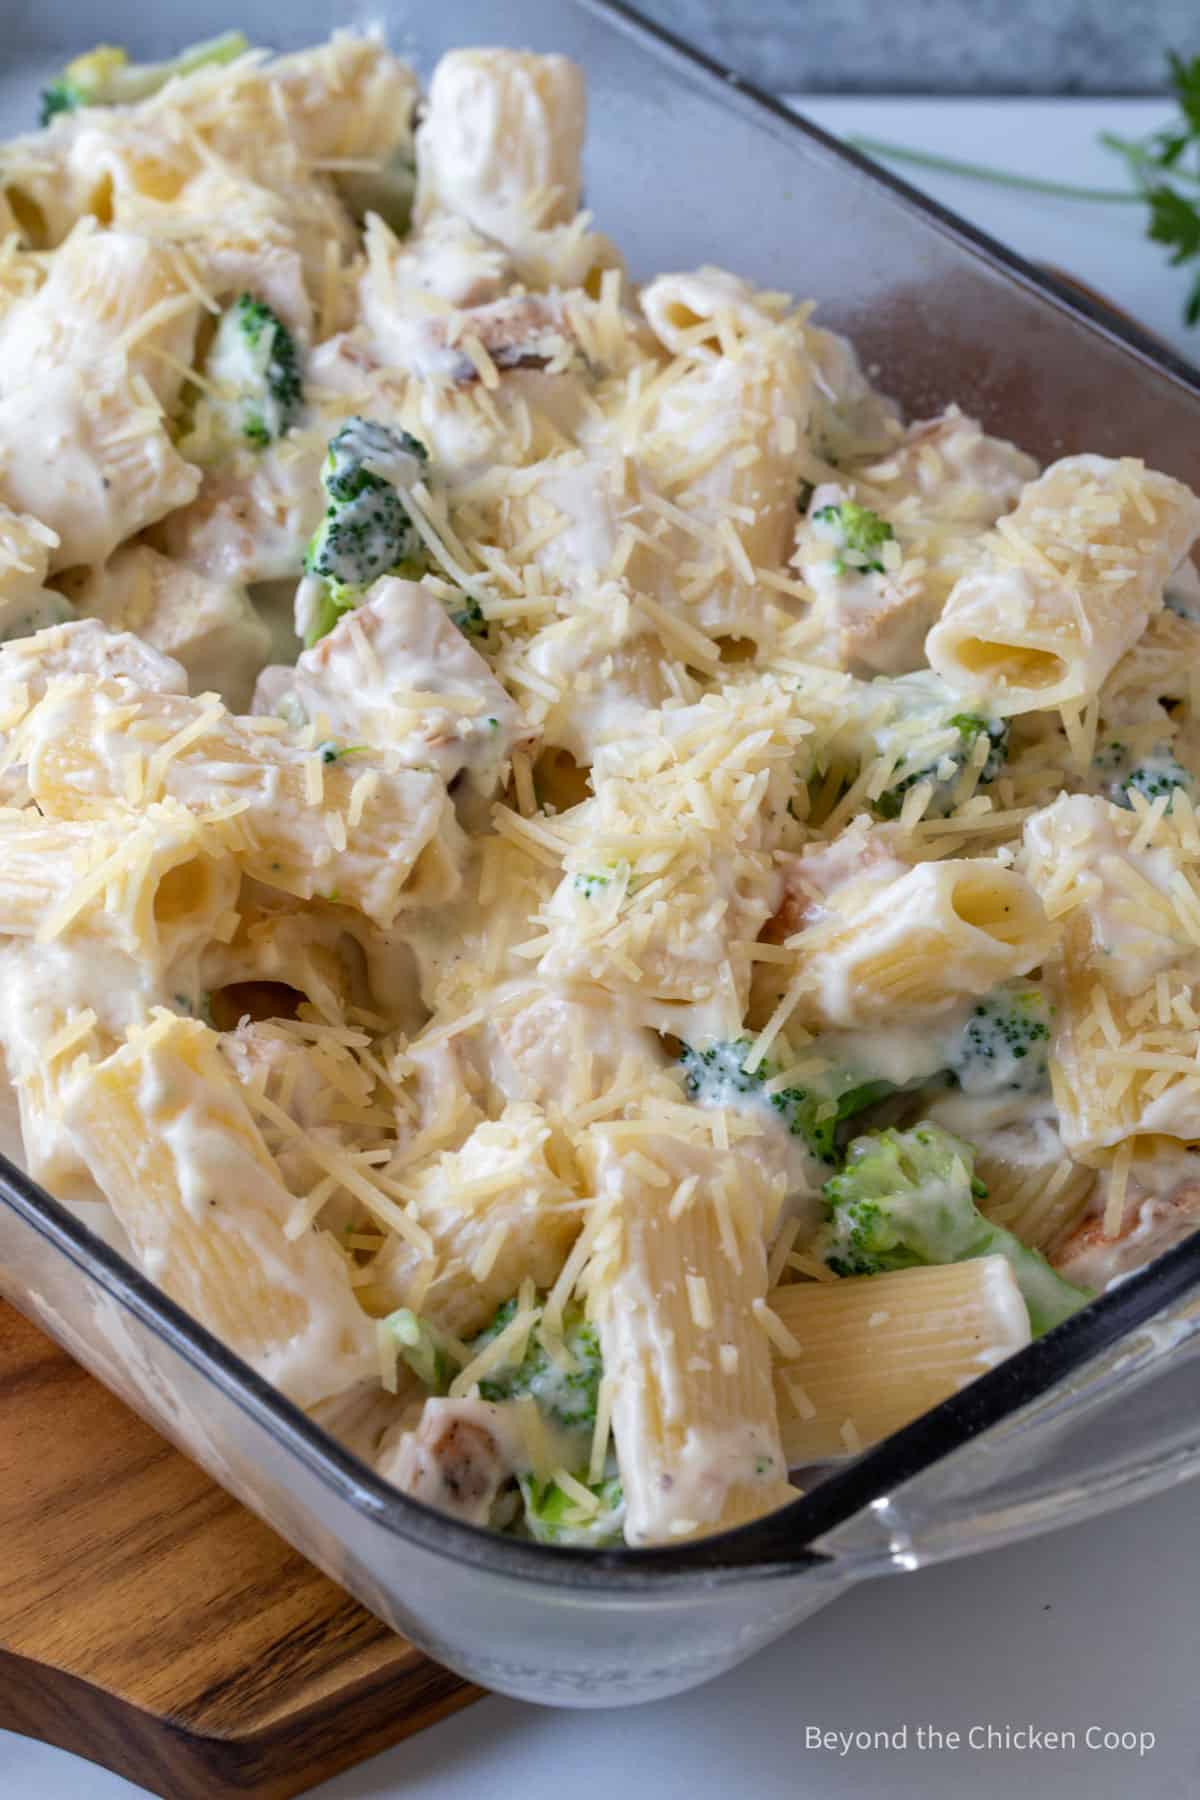 An unbaked chicken casserole in a glass dish.